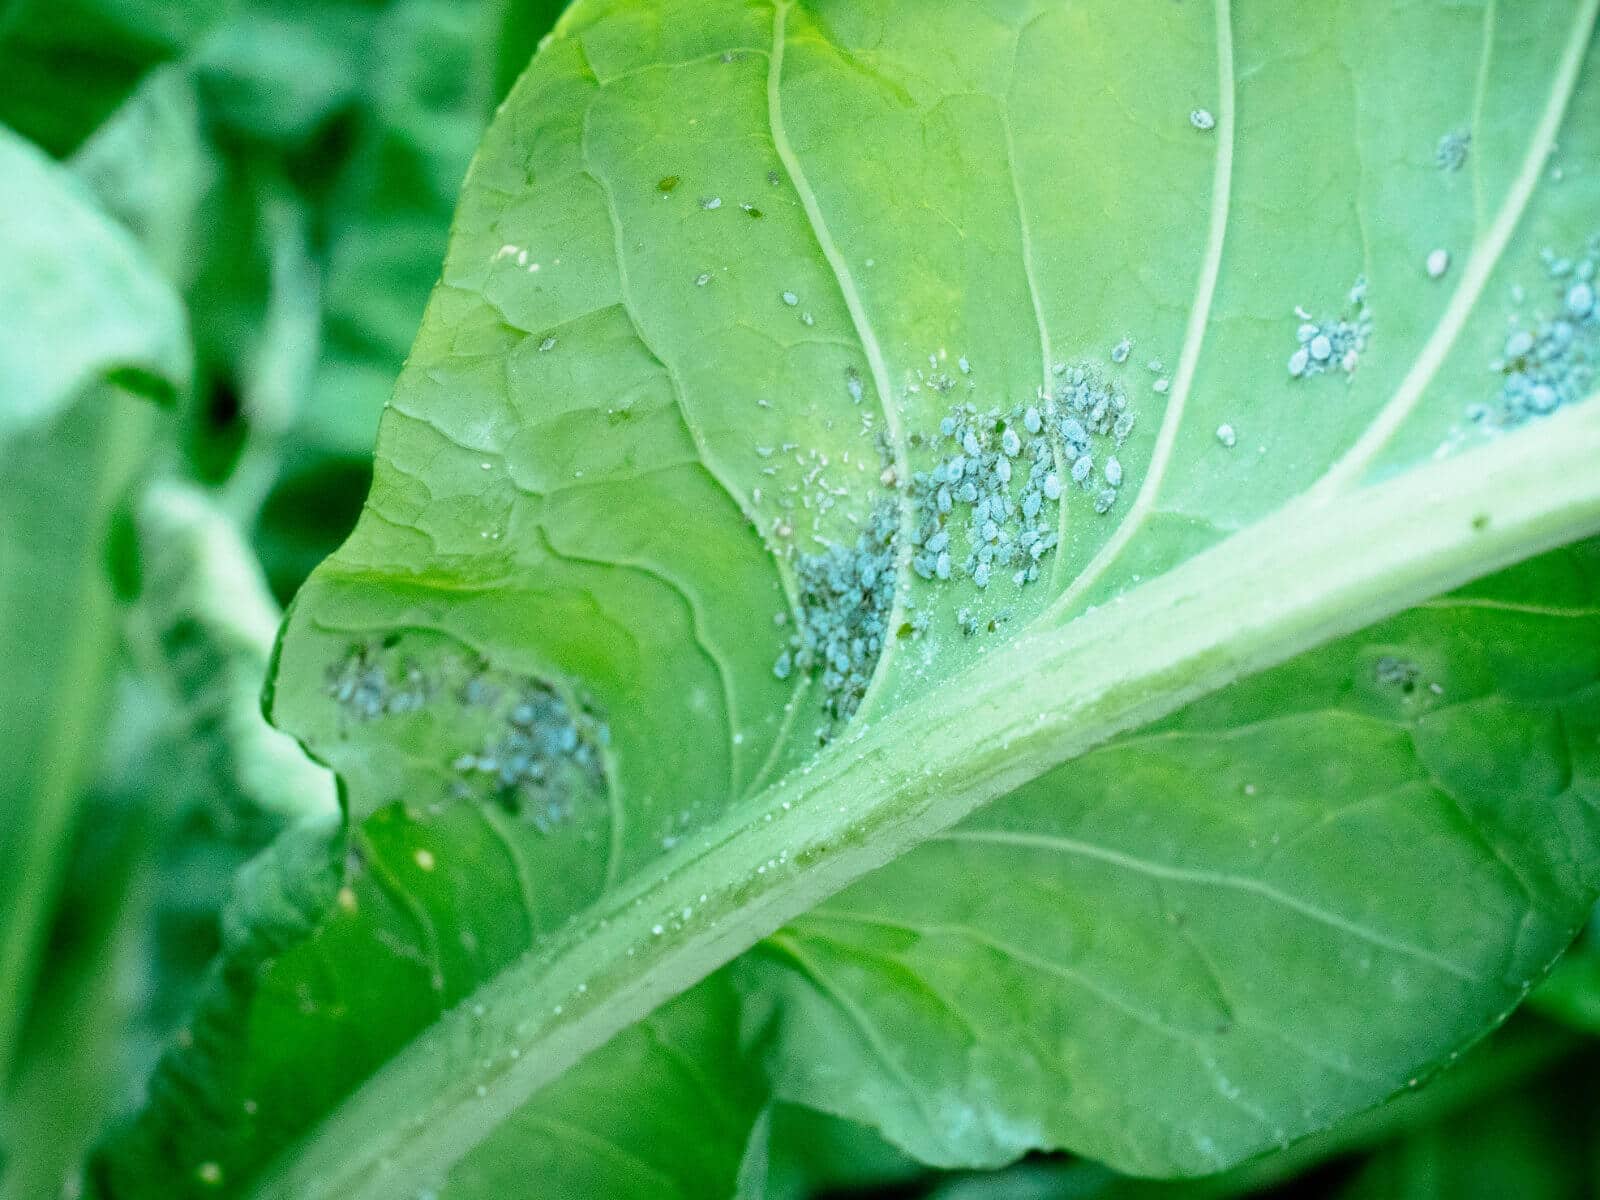 Aphid colony on a plant